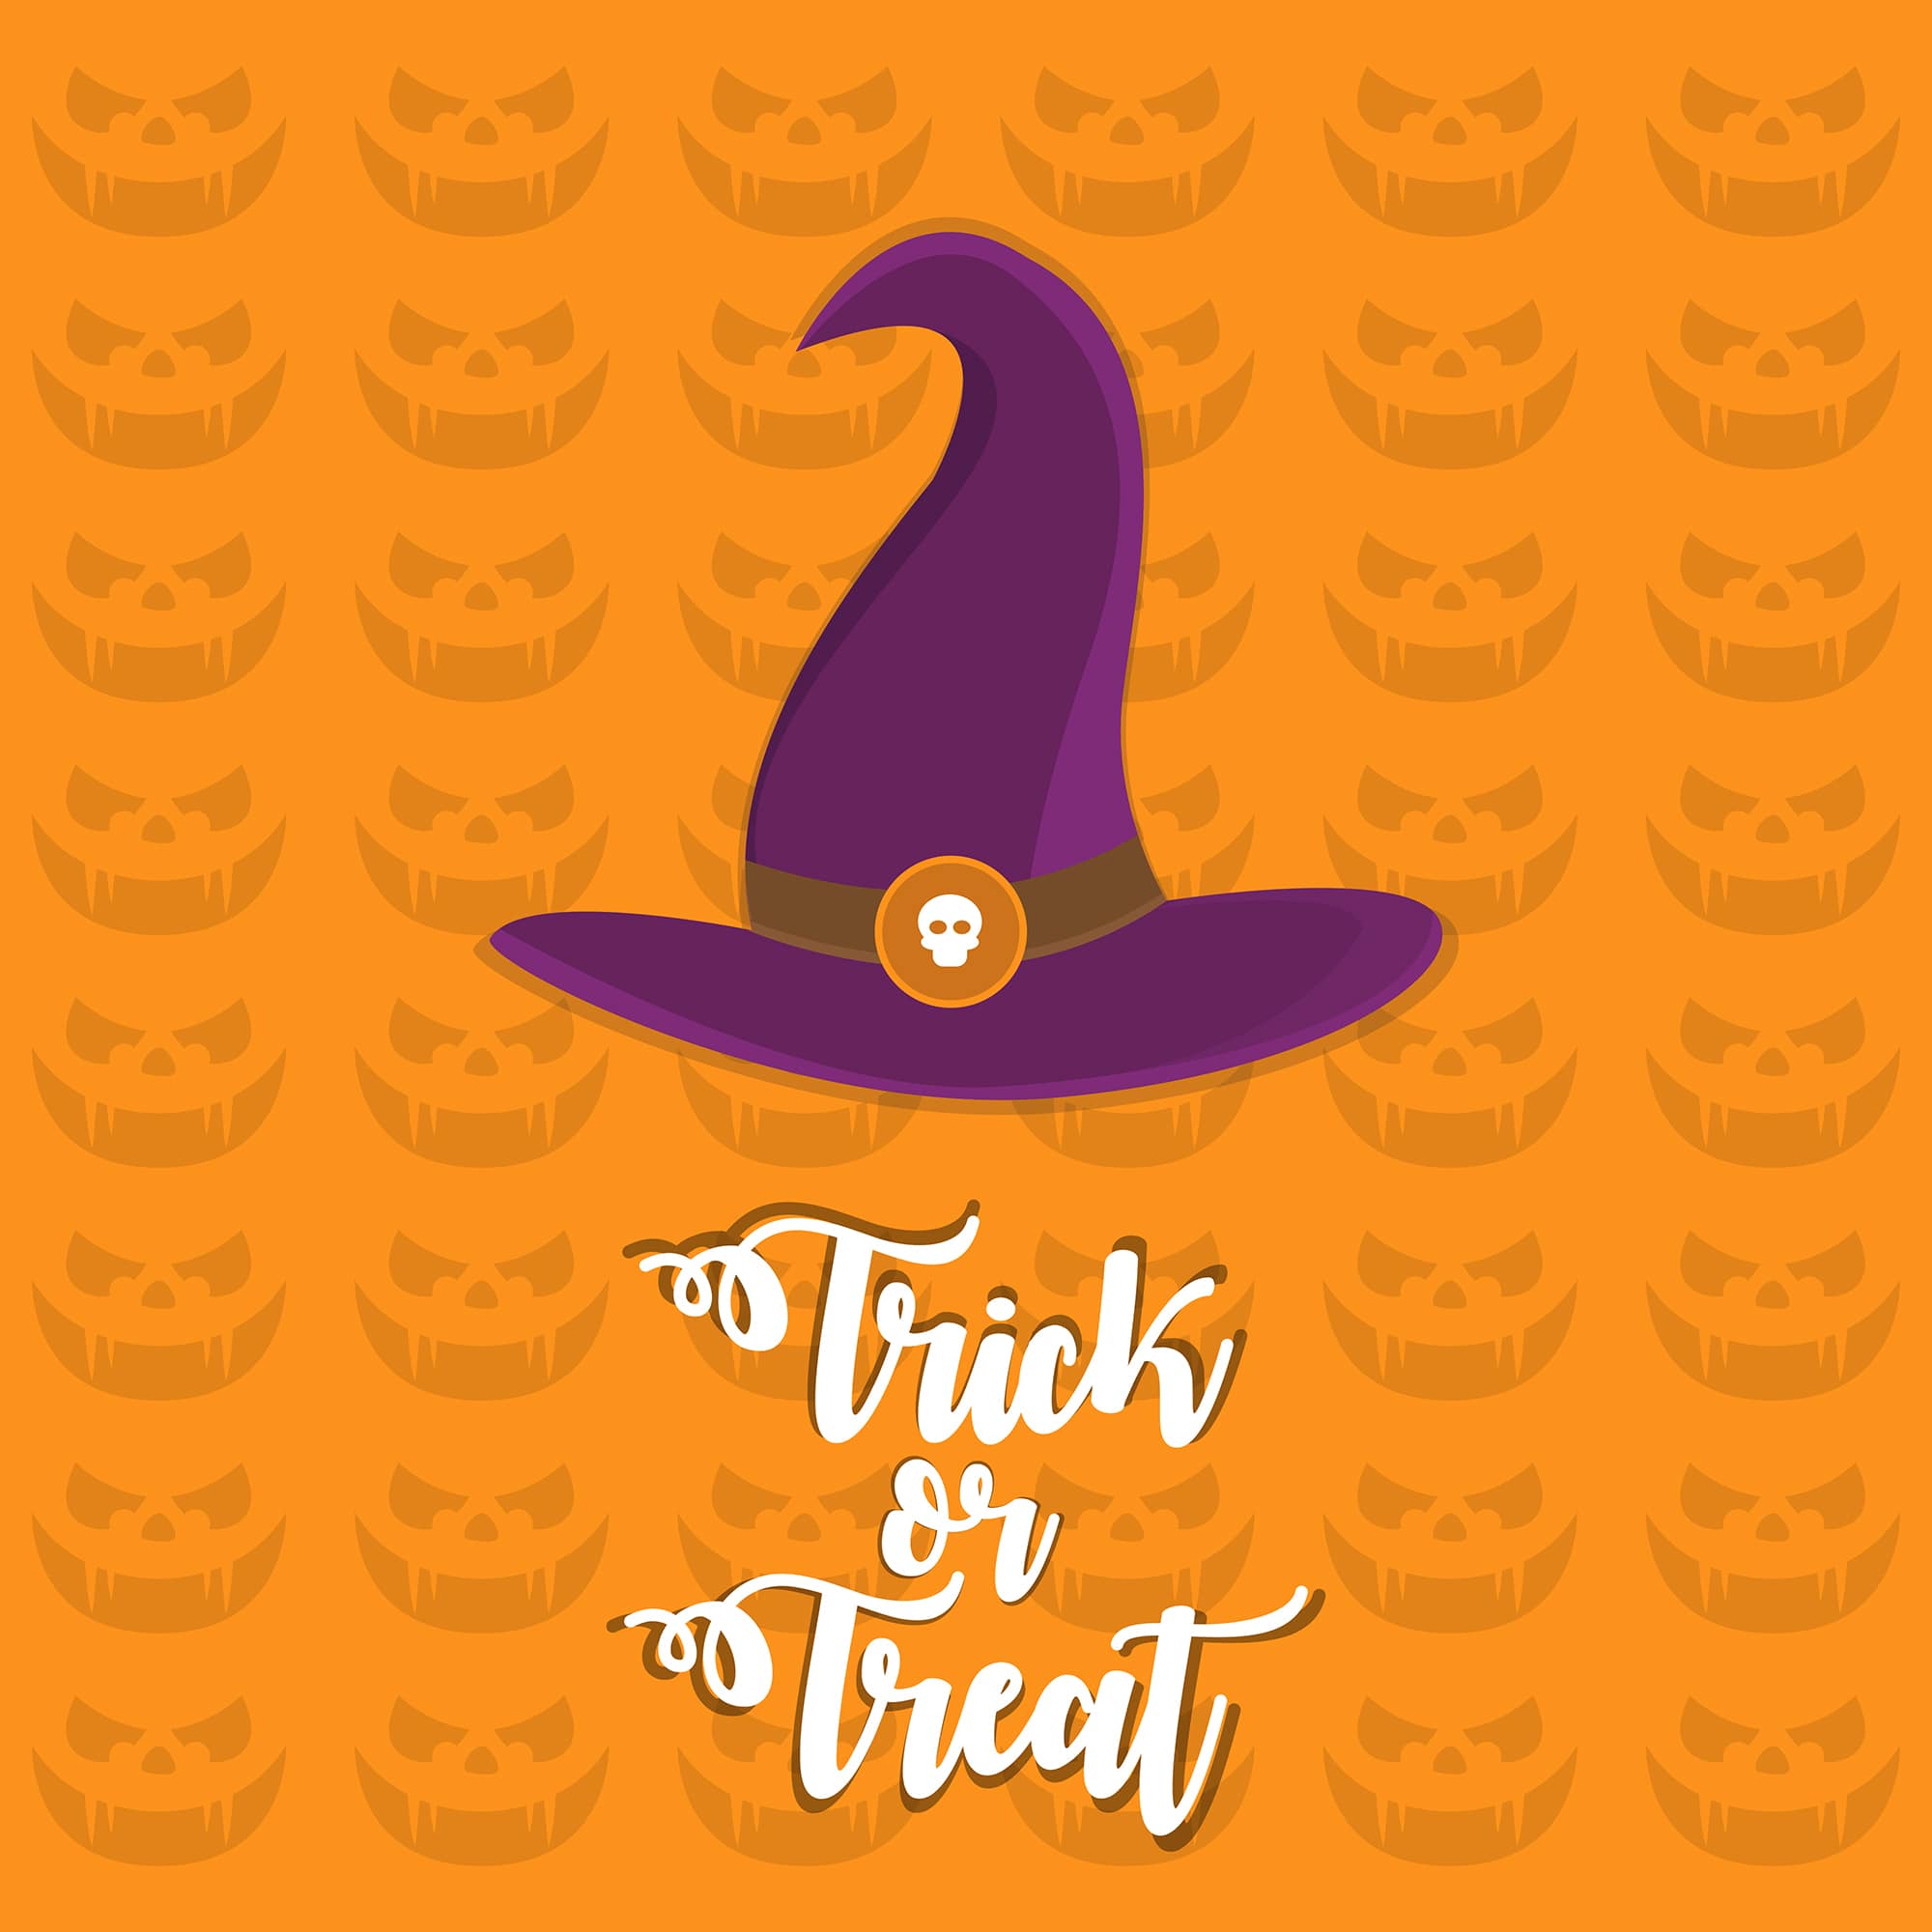 Download free Trick or Treat vector graphics for Halloween